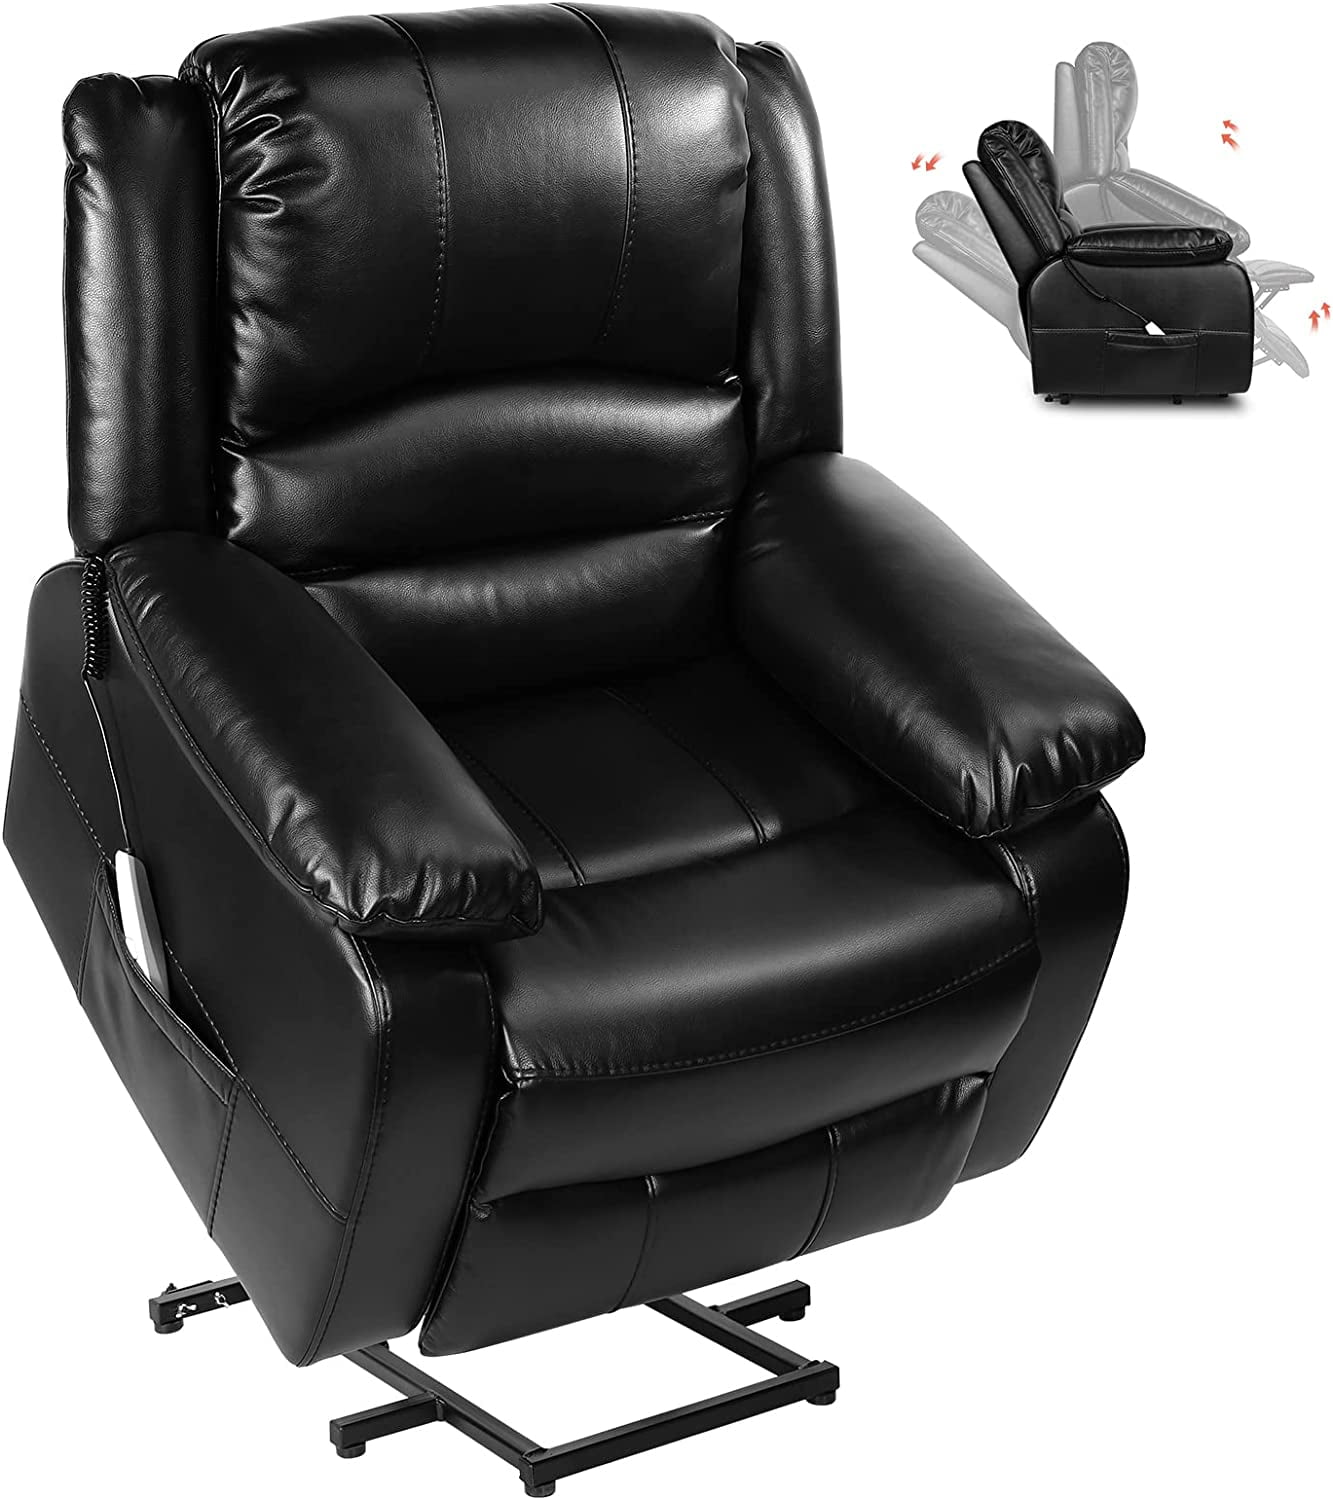 Black Recliner Chair Designs for Modern Living Spaces缩略图